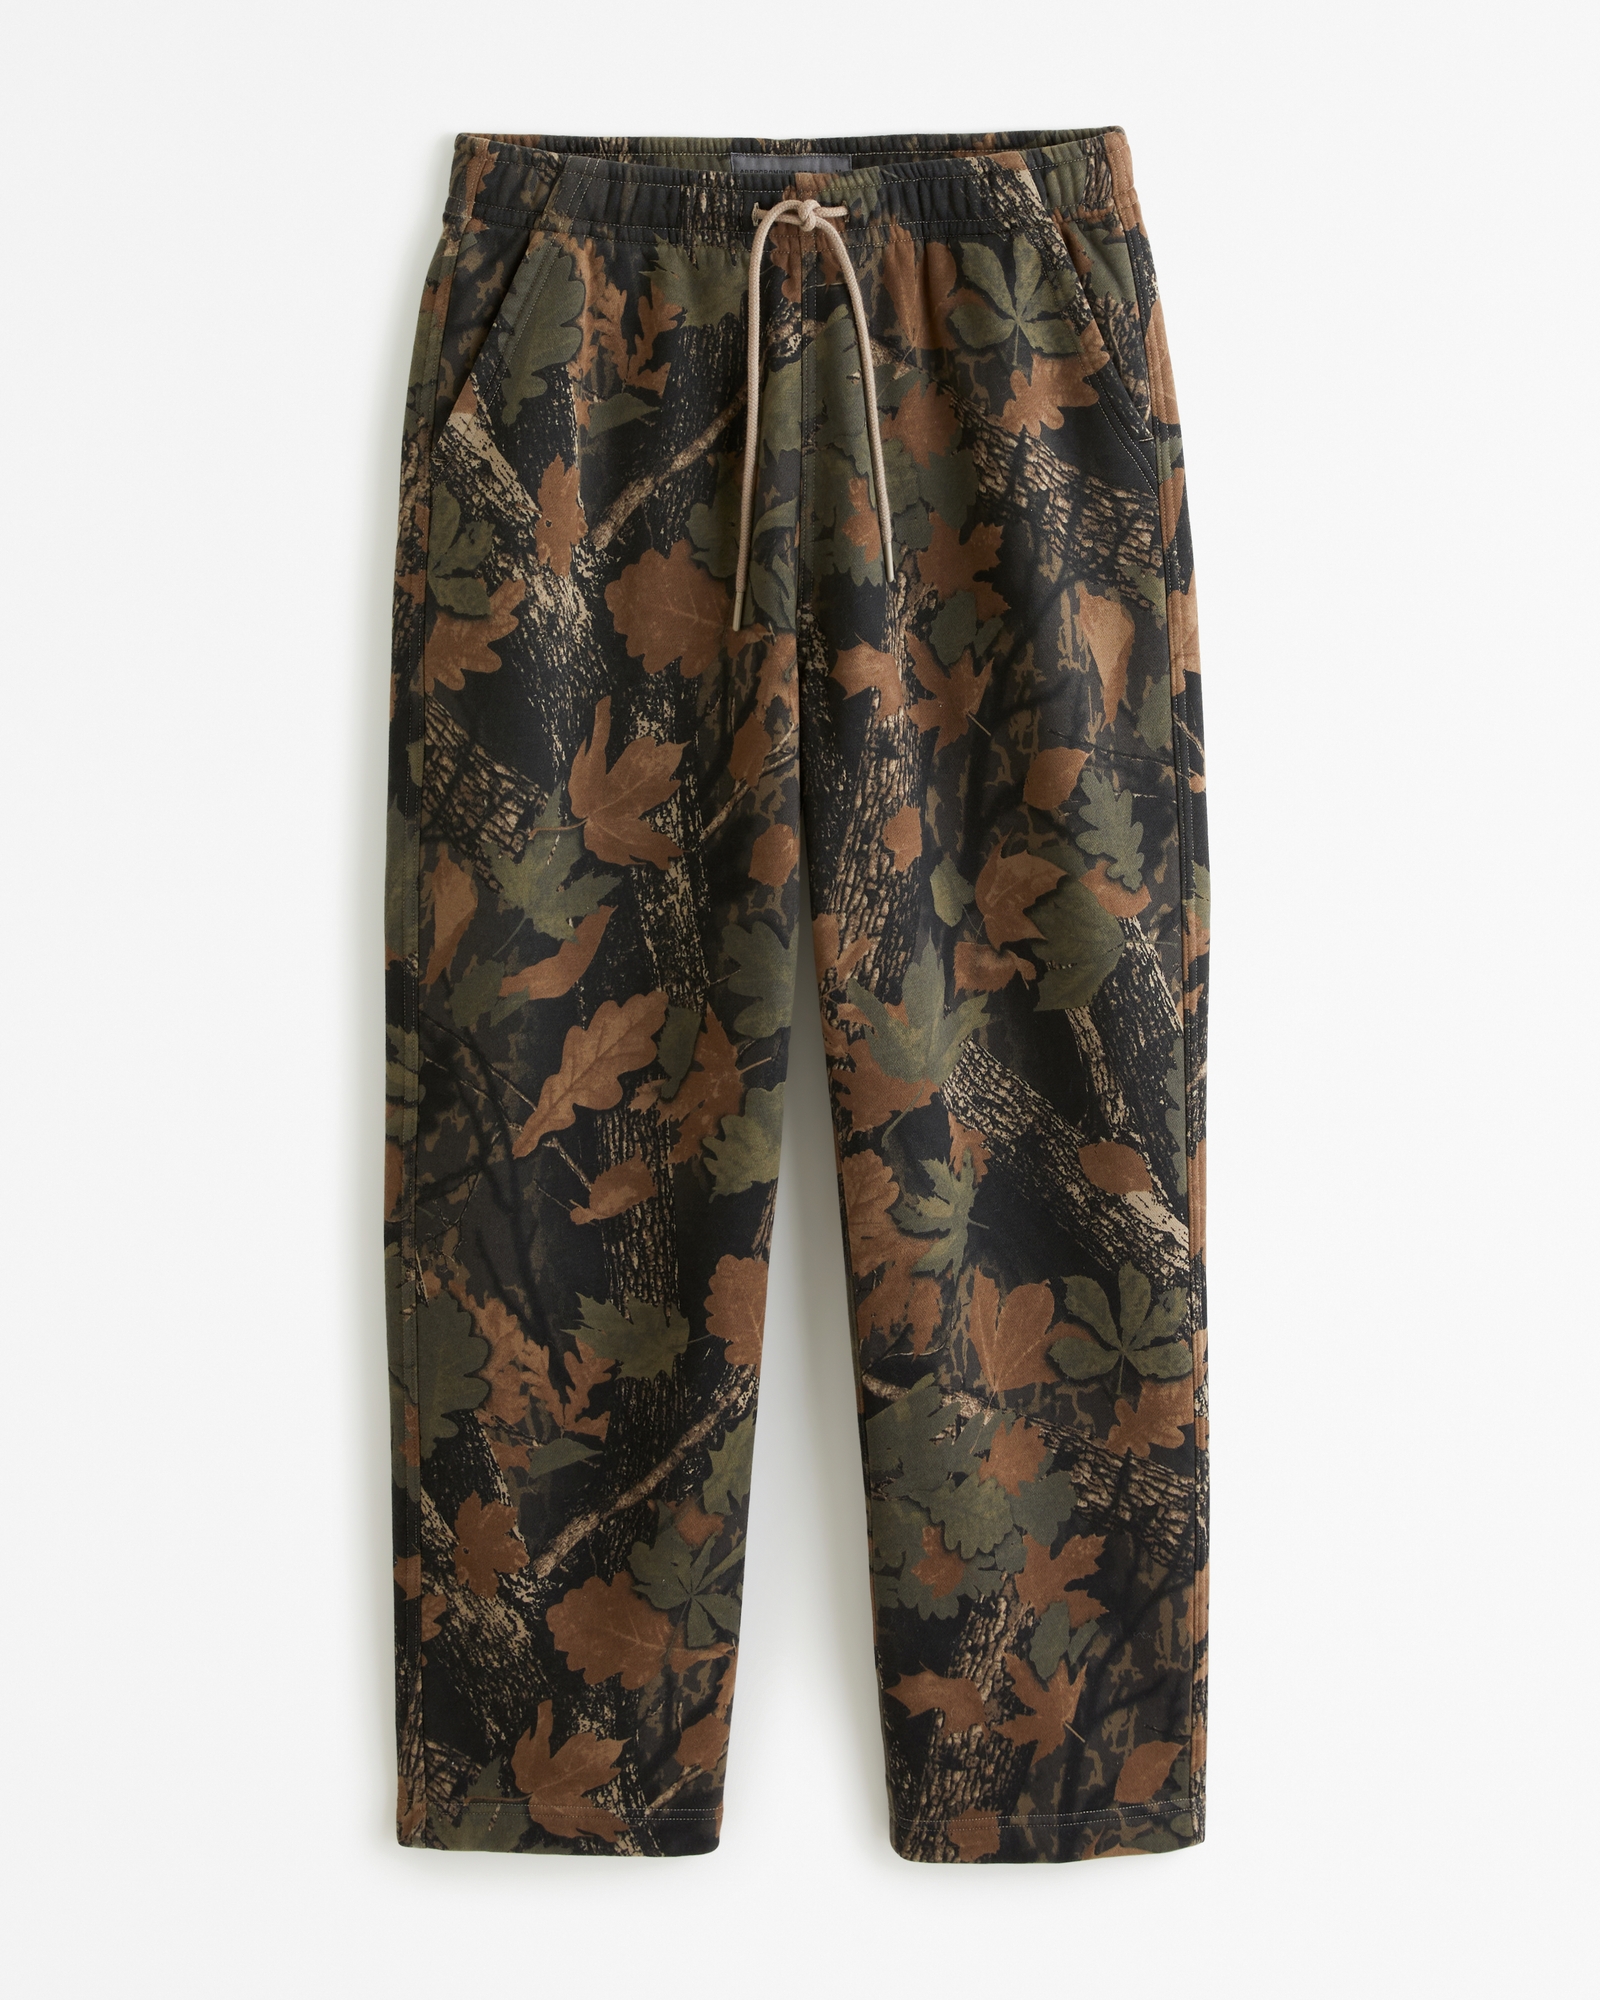 High waist drop crotch style joggers/pants doesn't need to be camo